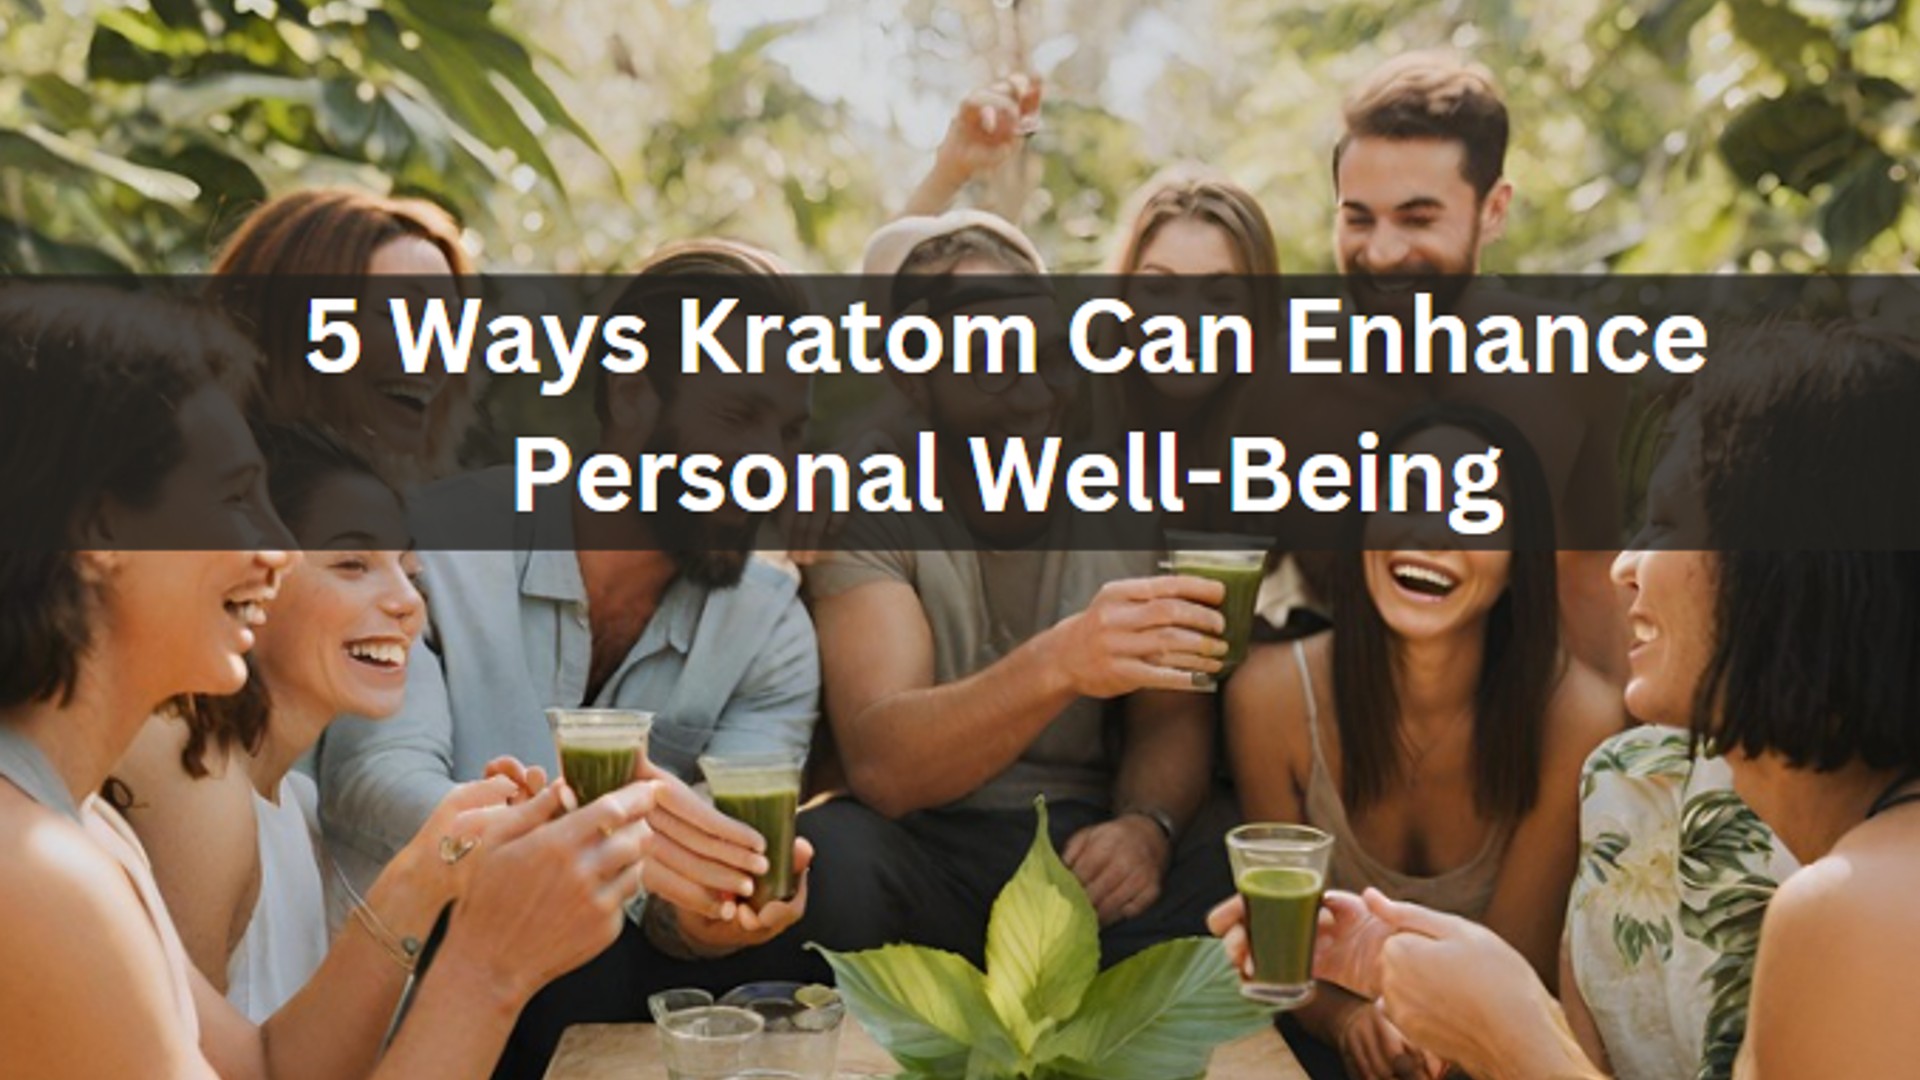 5 ways kratom can enahnce personal well-being